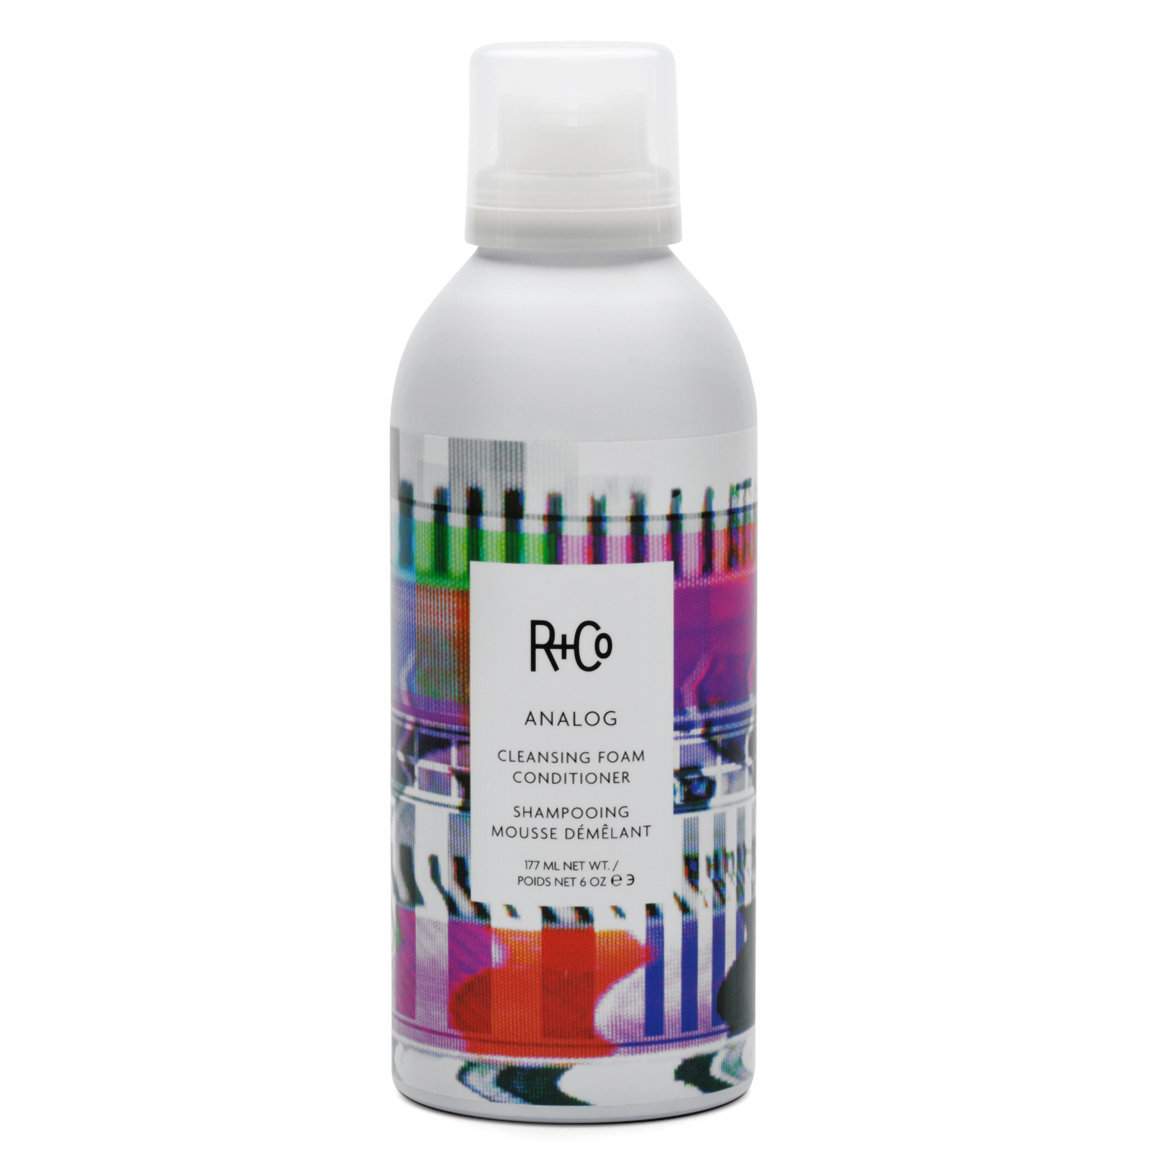 R+Co Analog Cleansing Foam Conditioner  6 oz alternative view 1 - product swatch.